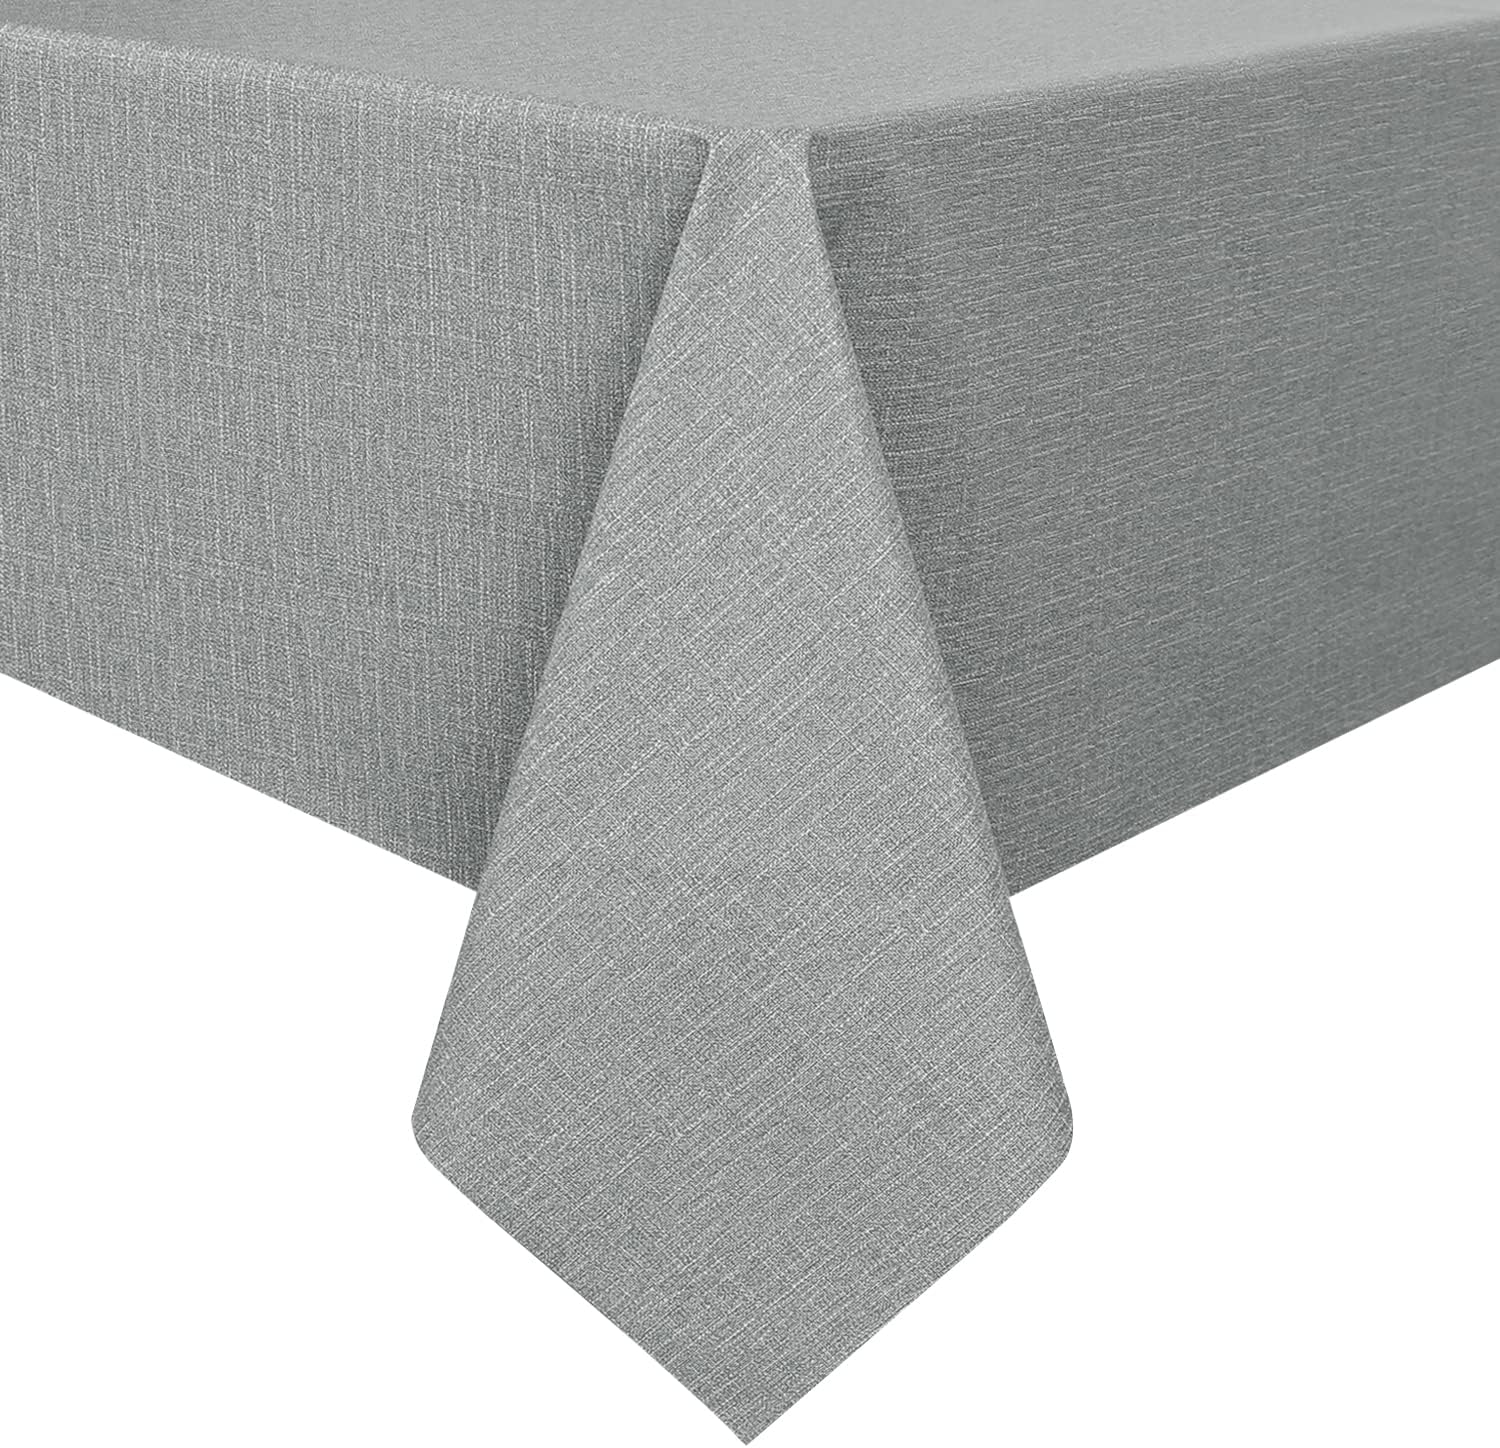 Romanstile 100% Waterproof PVC Tablecloth, Rectangle Oil Spill Proof Stain Resistant Vinyl Table Cloth, Wipe Clean Plastic Table Covers for Kitchen/Dining/Parties - 54 x 78 Inch, Light Grey